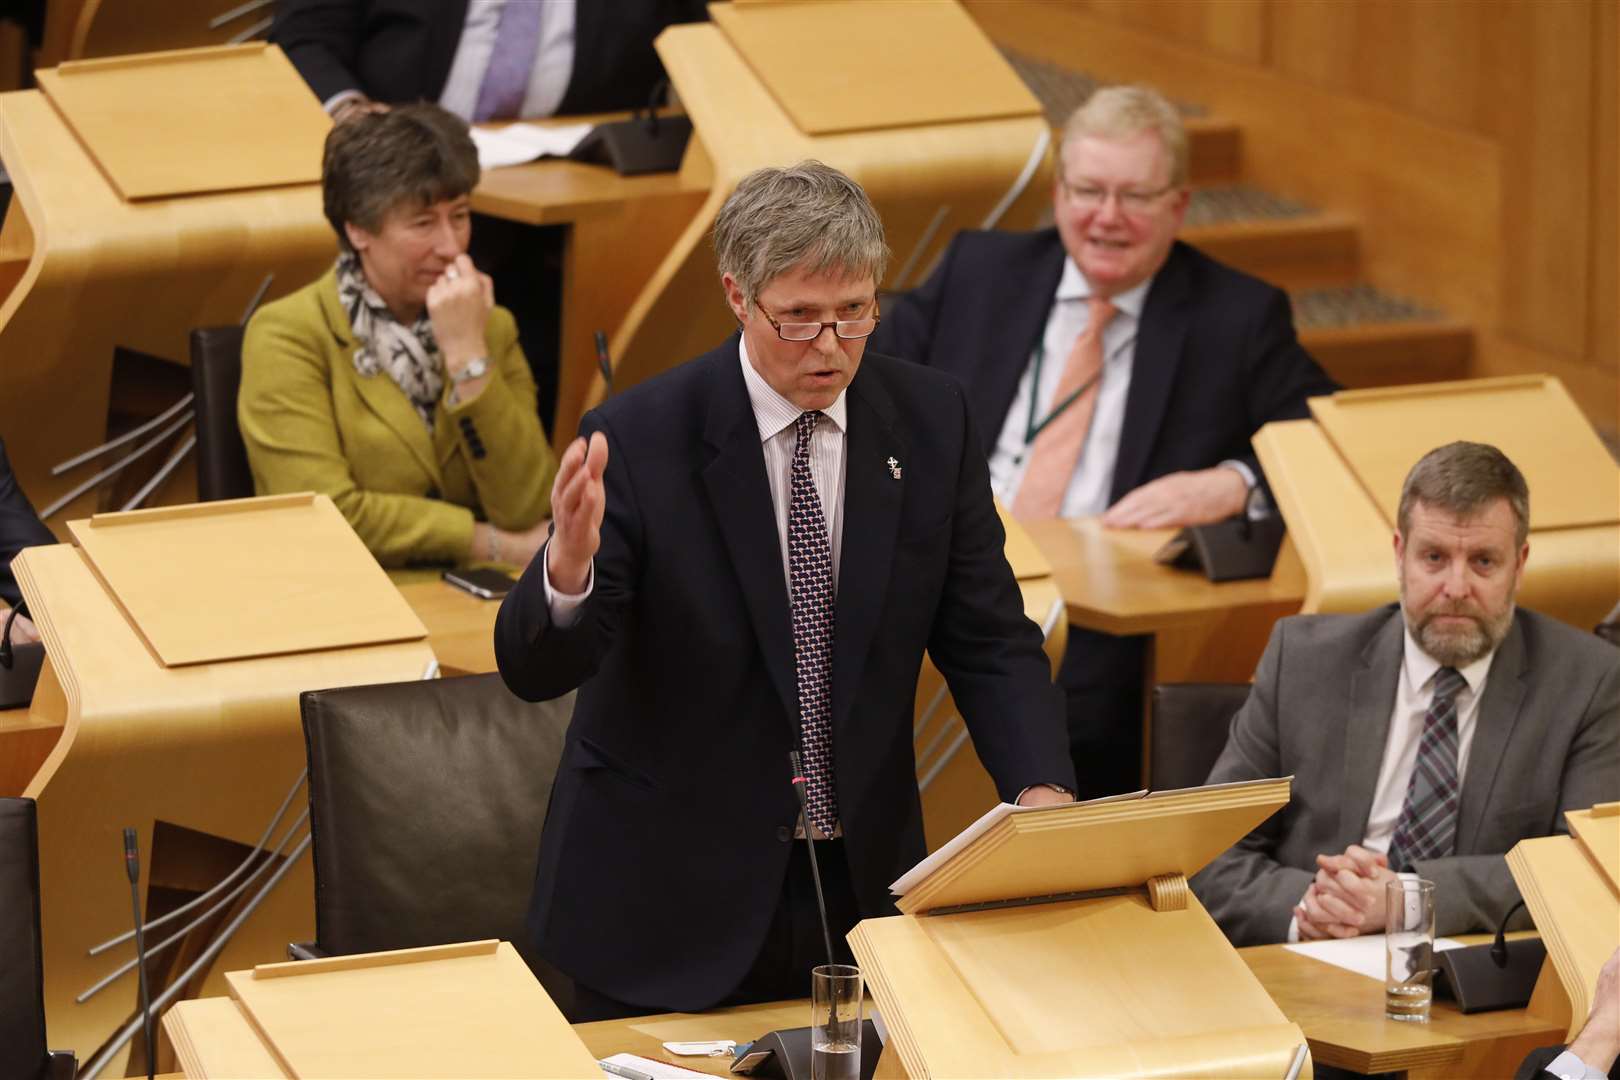 Edward Mountain MSP speaking in the chamber during a debate. Andrew Cowan/Scottish Parliament.